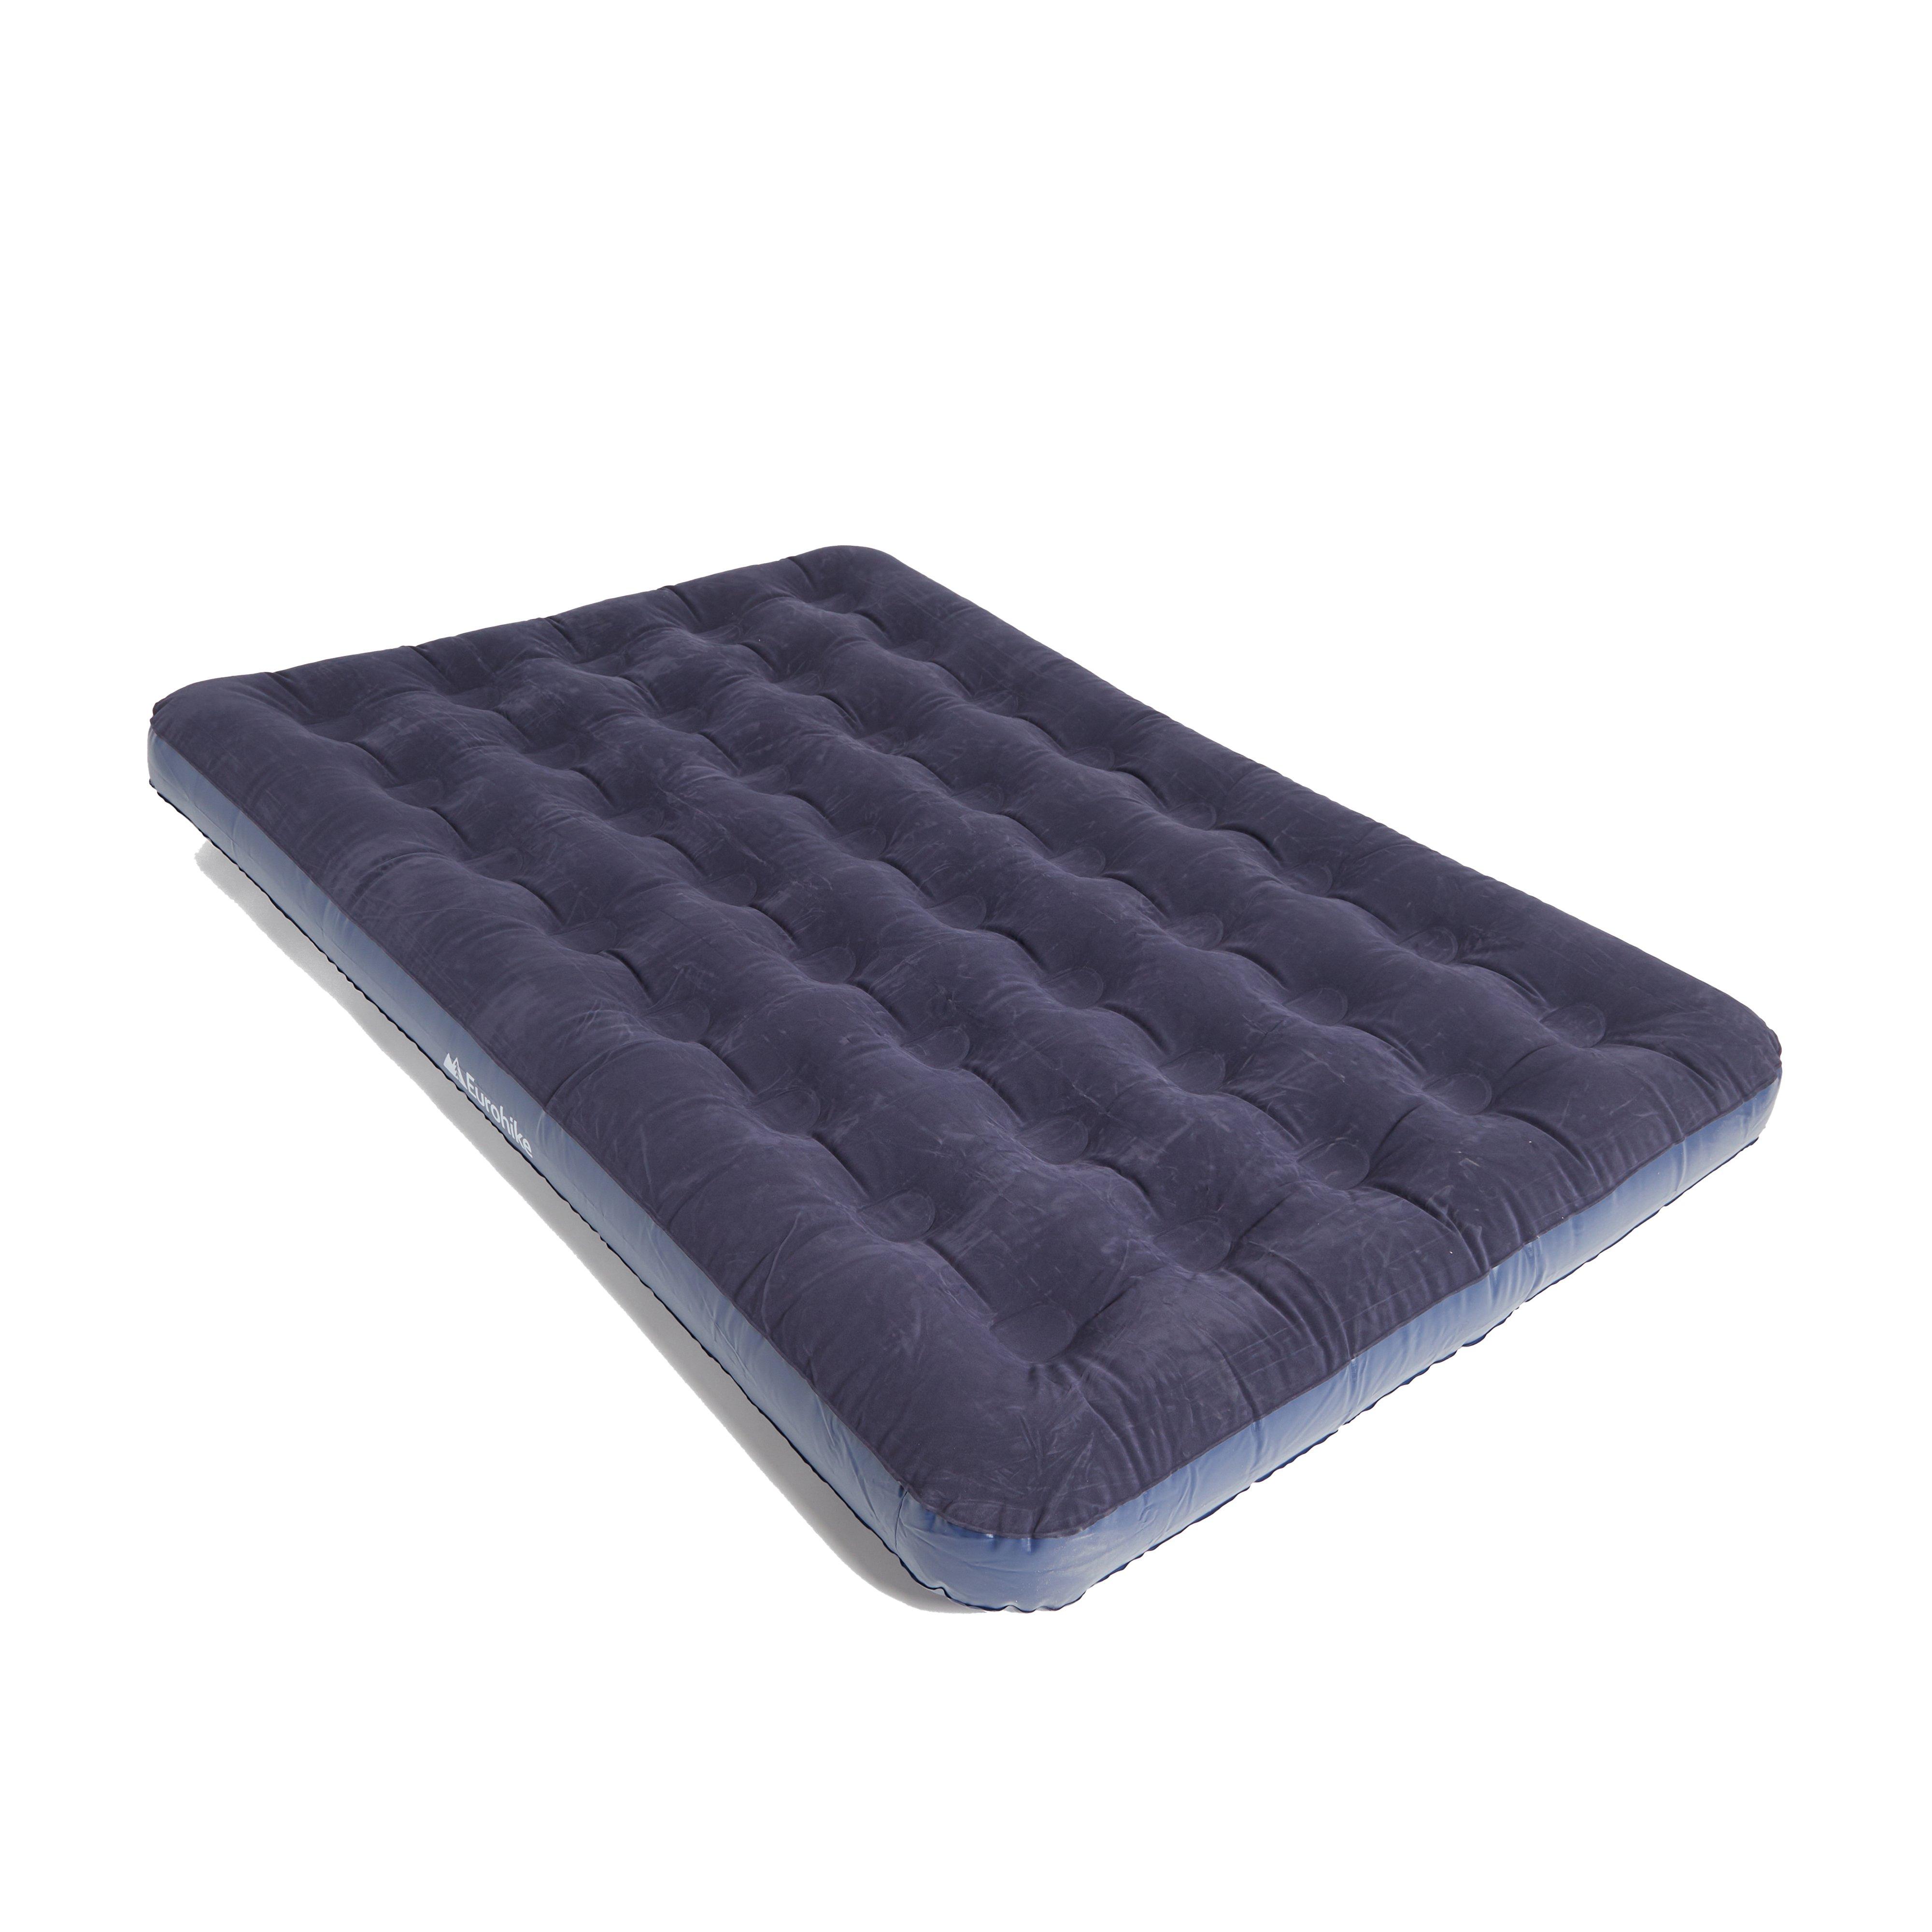 Eurohike Flocked Double Airbed Review